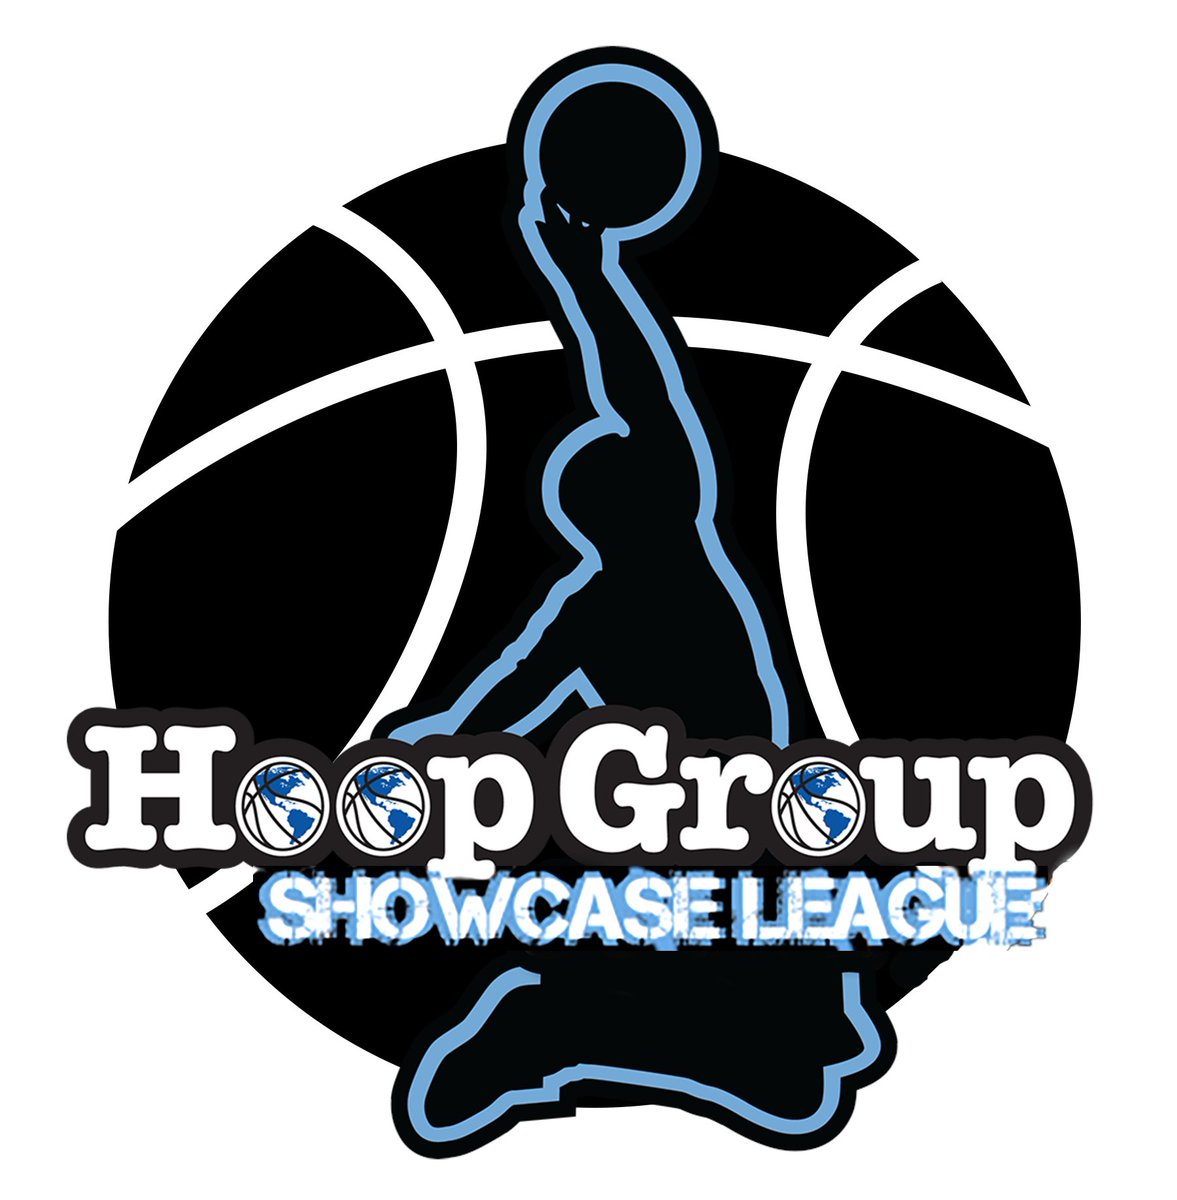 Updated @HGSL_HoopGroup 17U Point Standings 📊 1: @GoTeamSpartans (MA): 18 2: @STAT_Nation (MD): 13 3: @RIElite_ (RI): 10 4 (tie): @NJShoreshotBoys (NJ): 9 4 (tie): @DistrictBC (DC): 9 Full point standings 👇🏾 theseasonticket.com/hgslstandings @TheHoopGroup